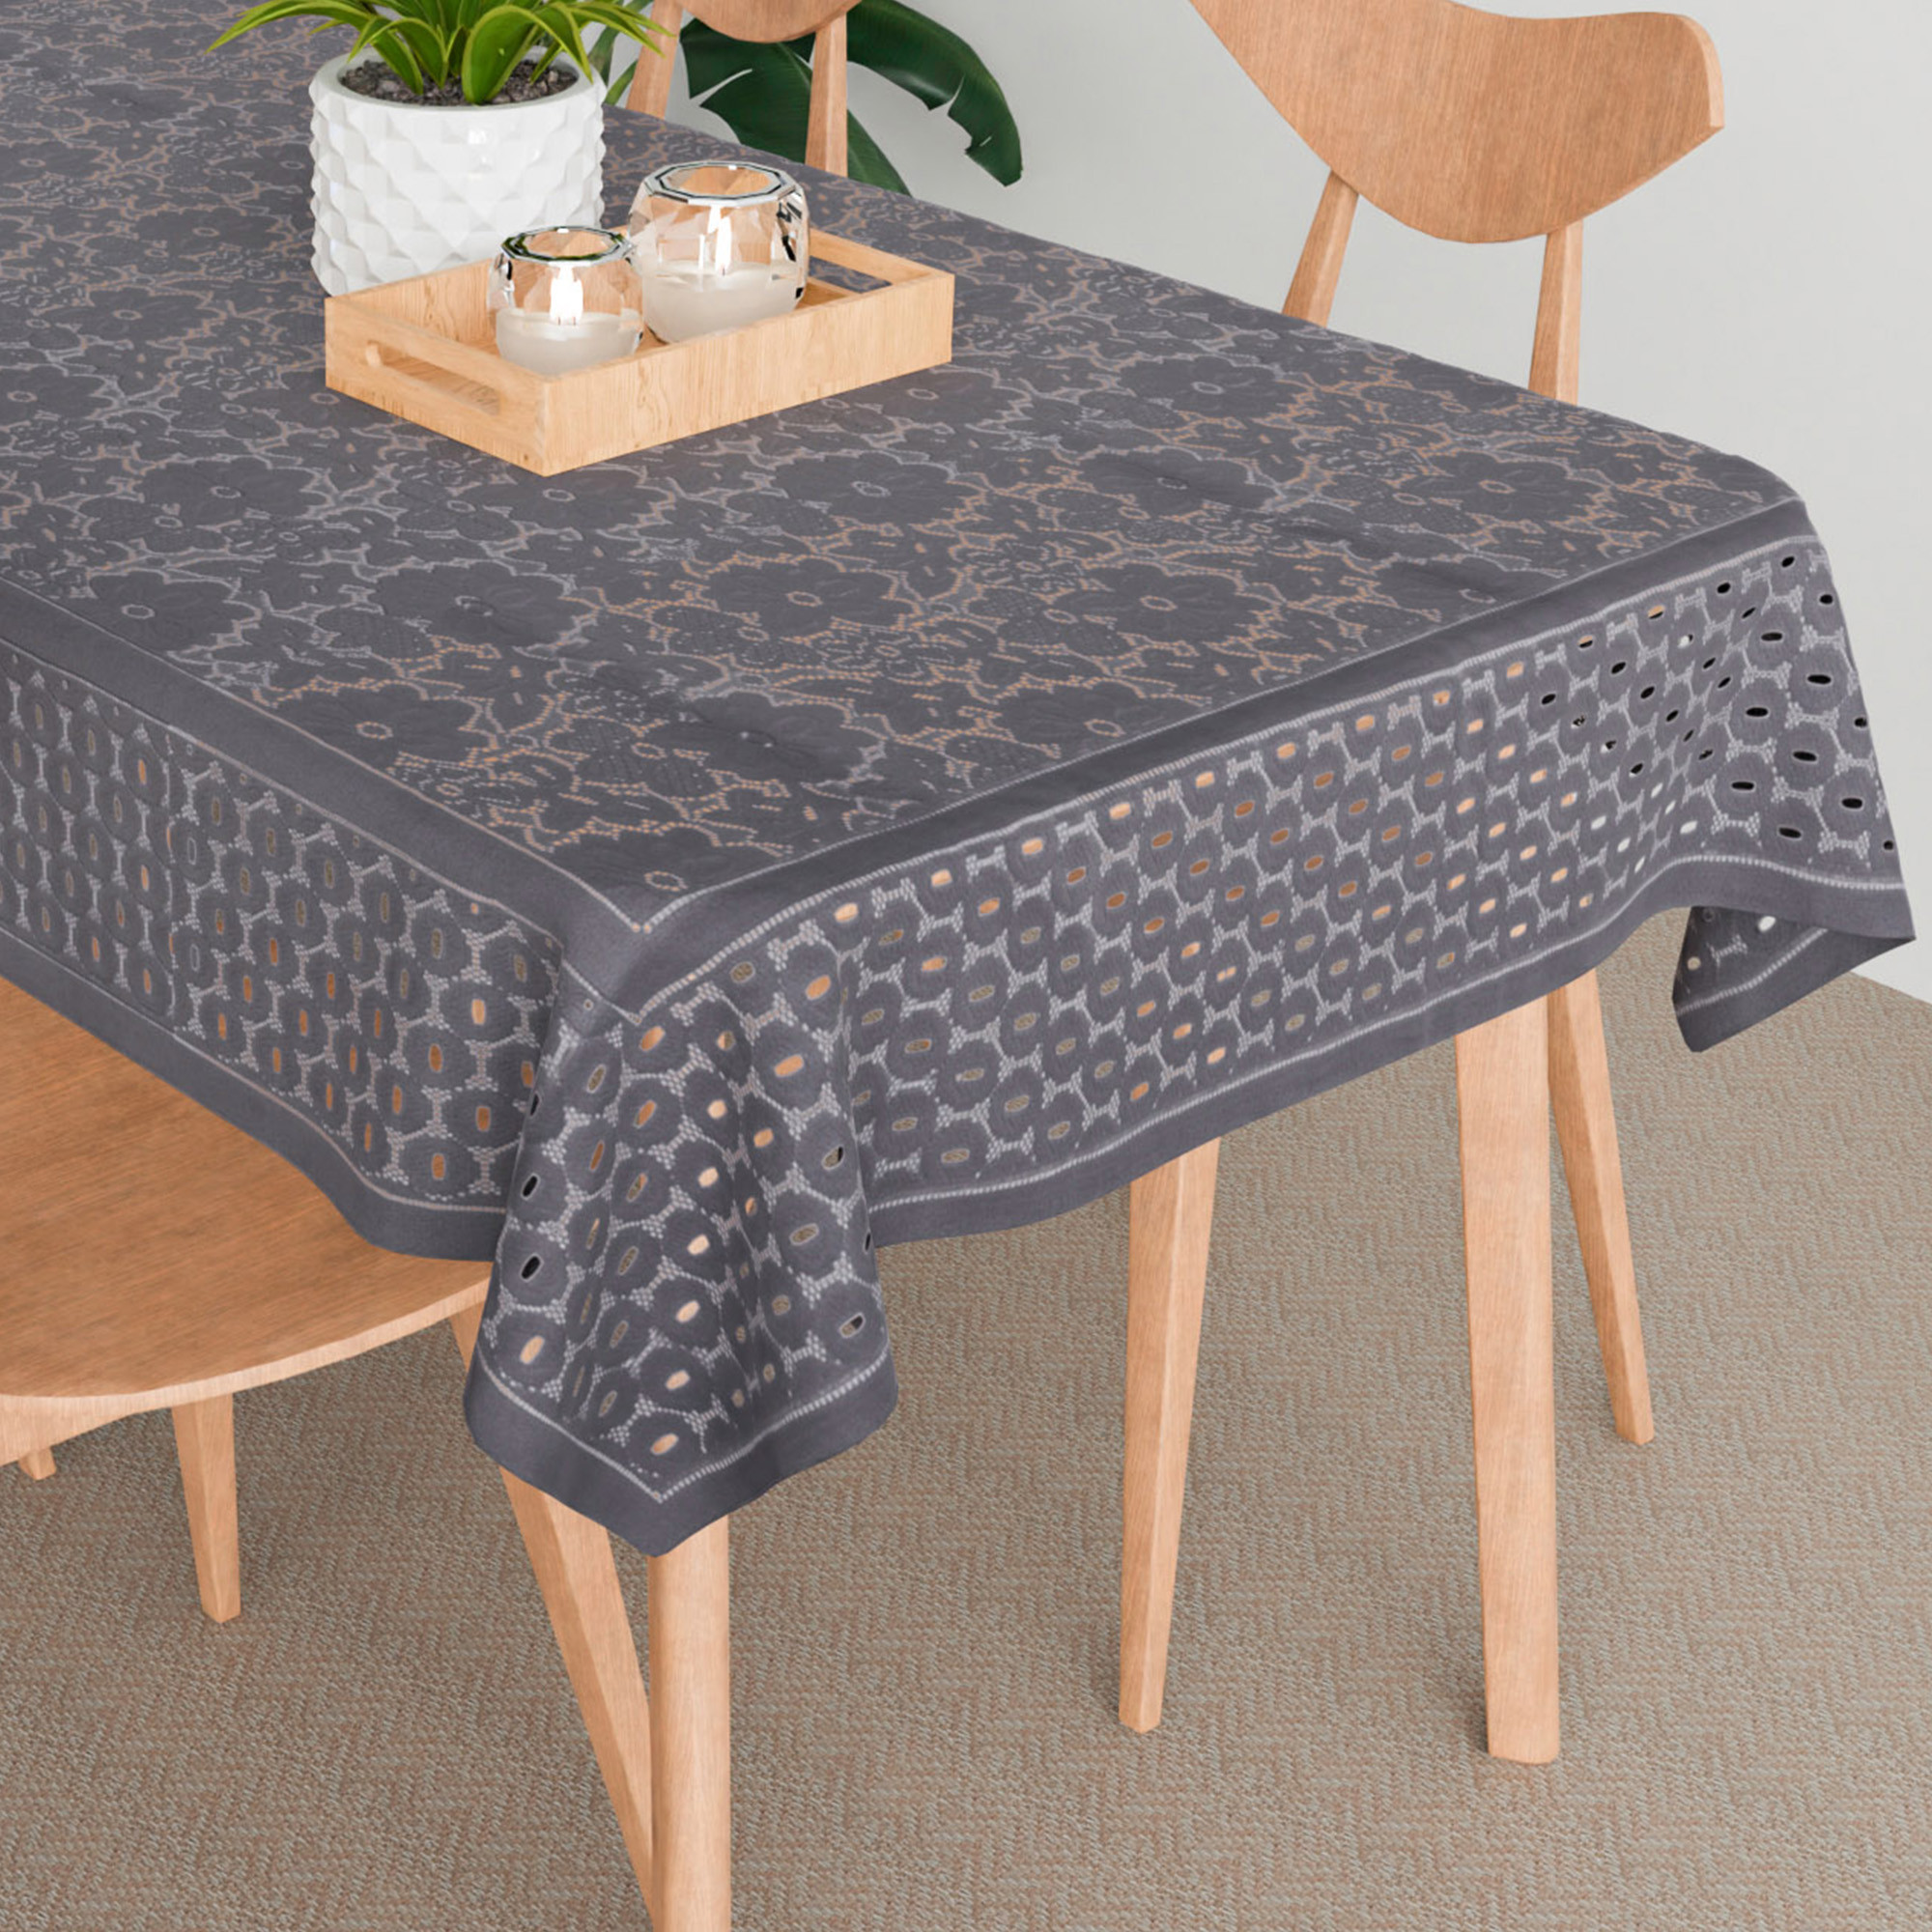 Kuber Industries Table Cover | Net Tabletop Cover | Table Linen Cover | Table Cloth Cover | Table Cover for Kitchen | Table Cover for Hall Décor | Self Flower Valley-Design | 45x70 Inch | Gray